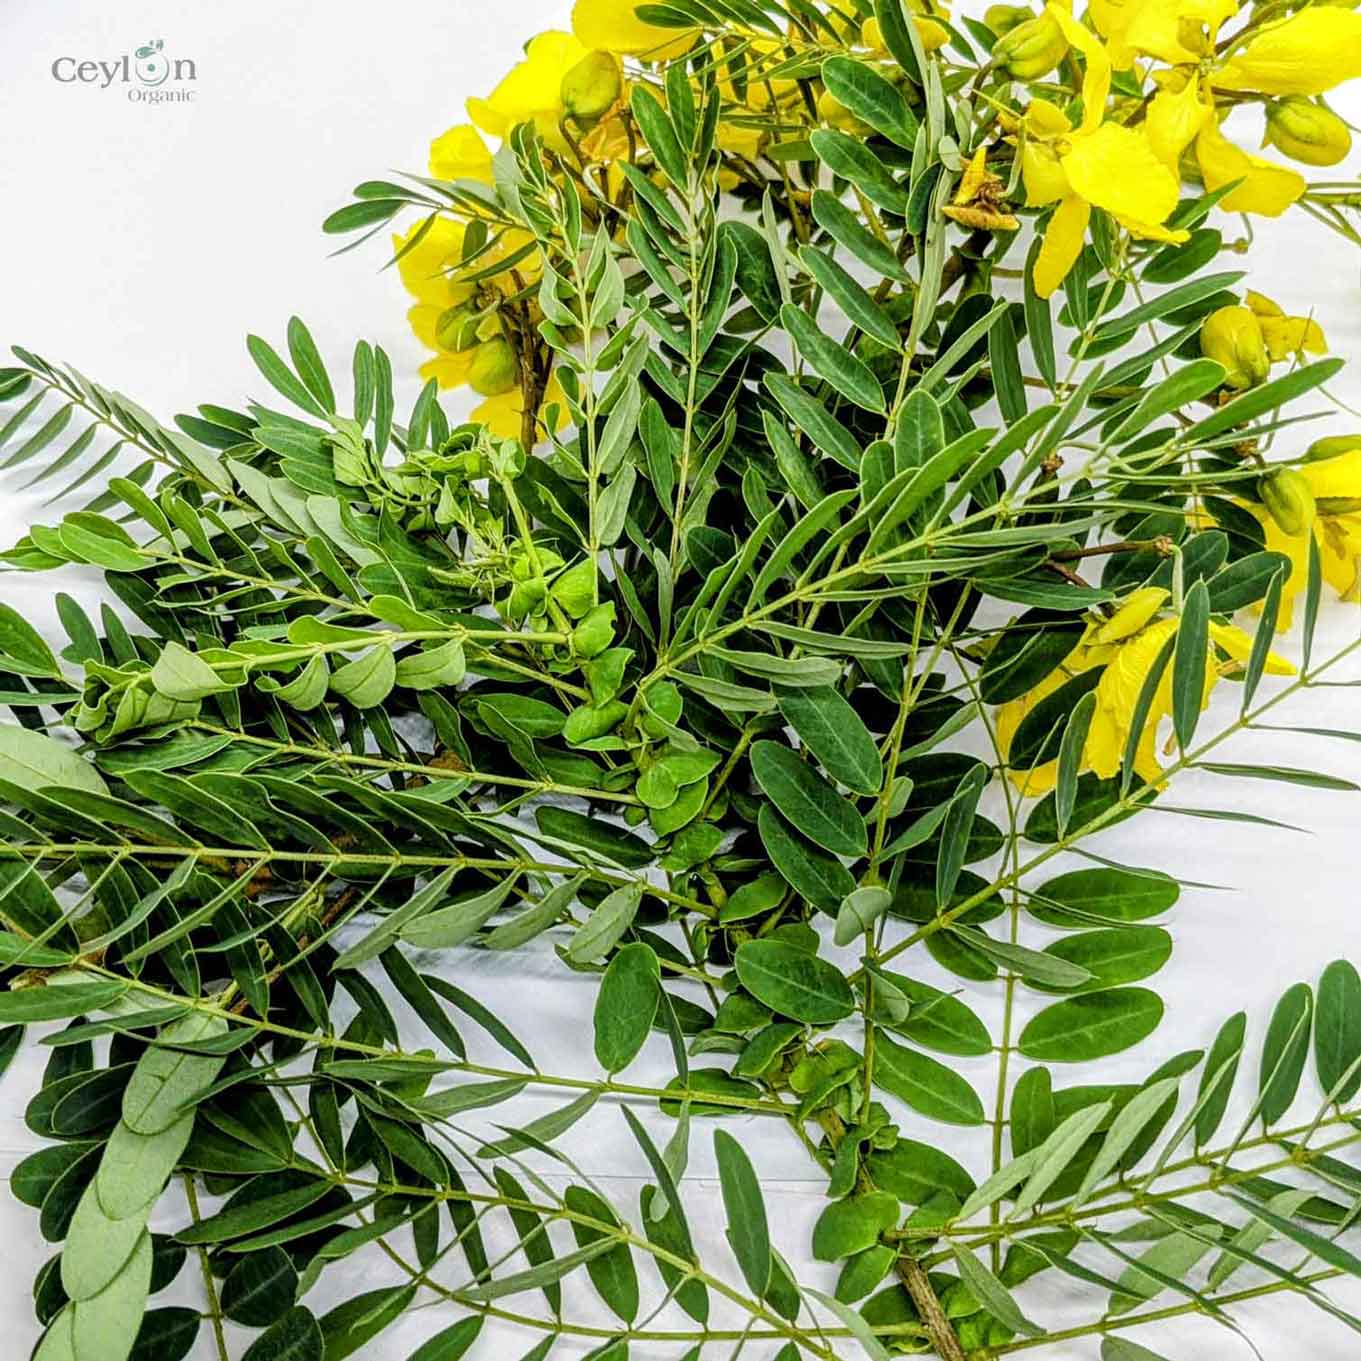 2kg+ Senna Auriculata Leaves - The Perfect Ingredient for Teas, Smoothies, and Herbal Remedies | Ceylon Organic-1